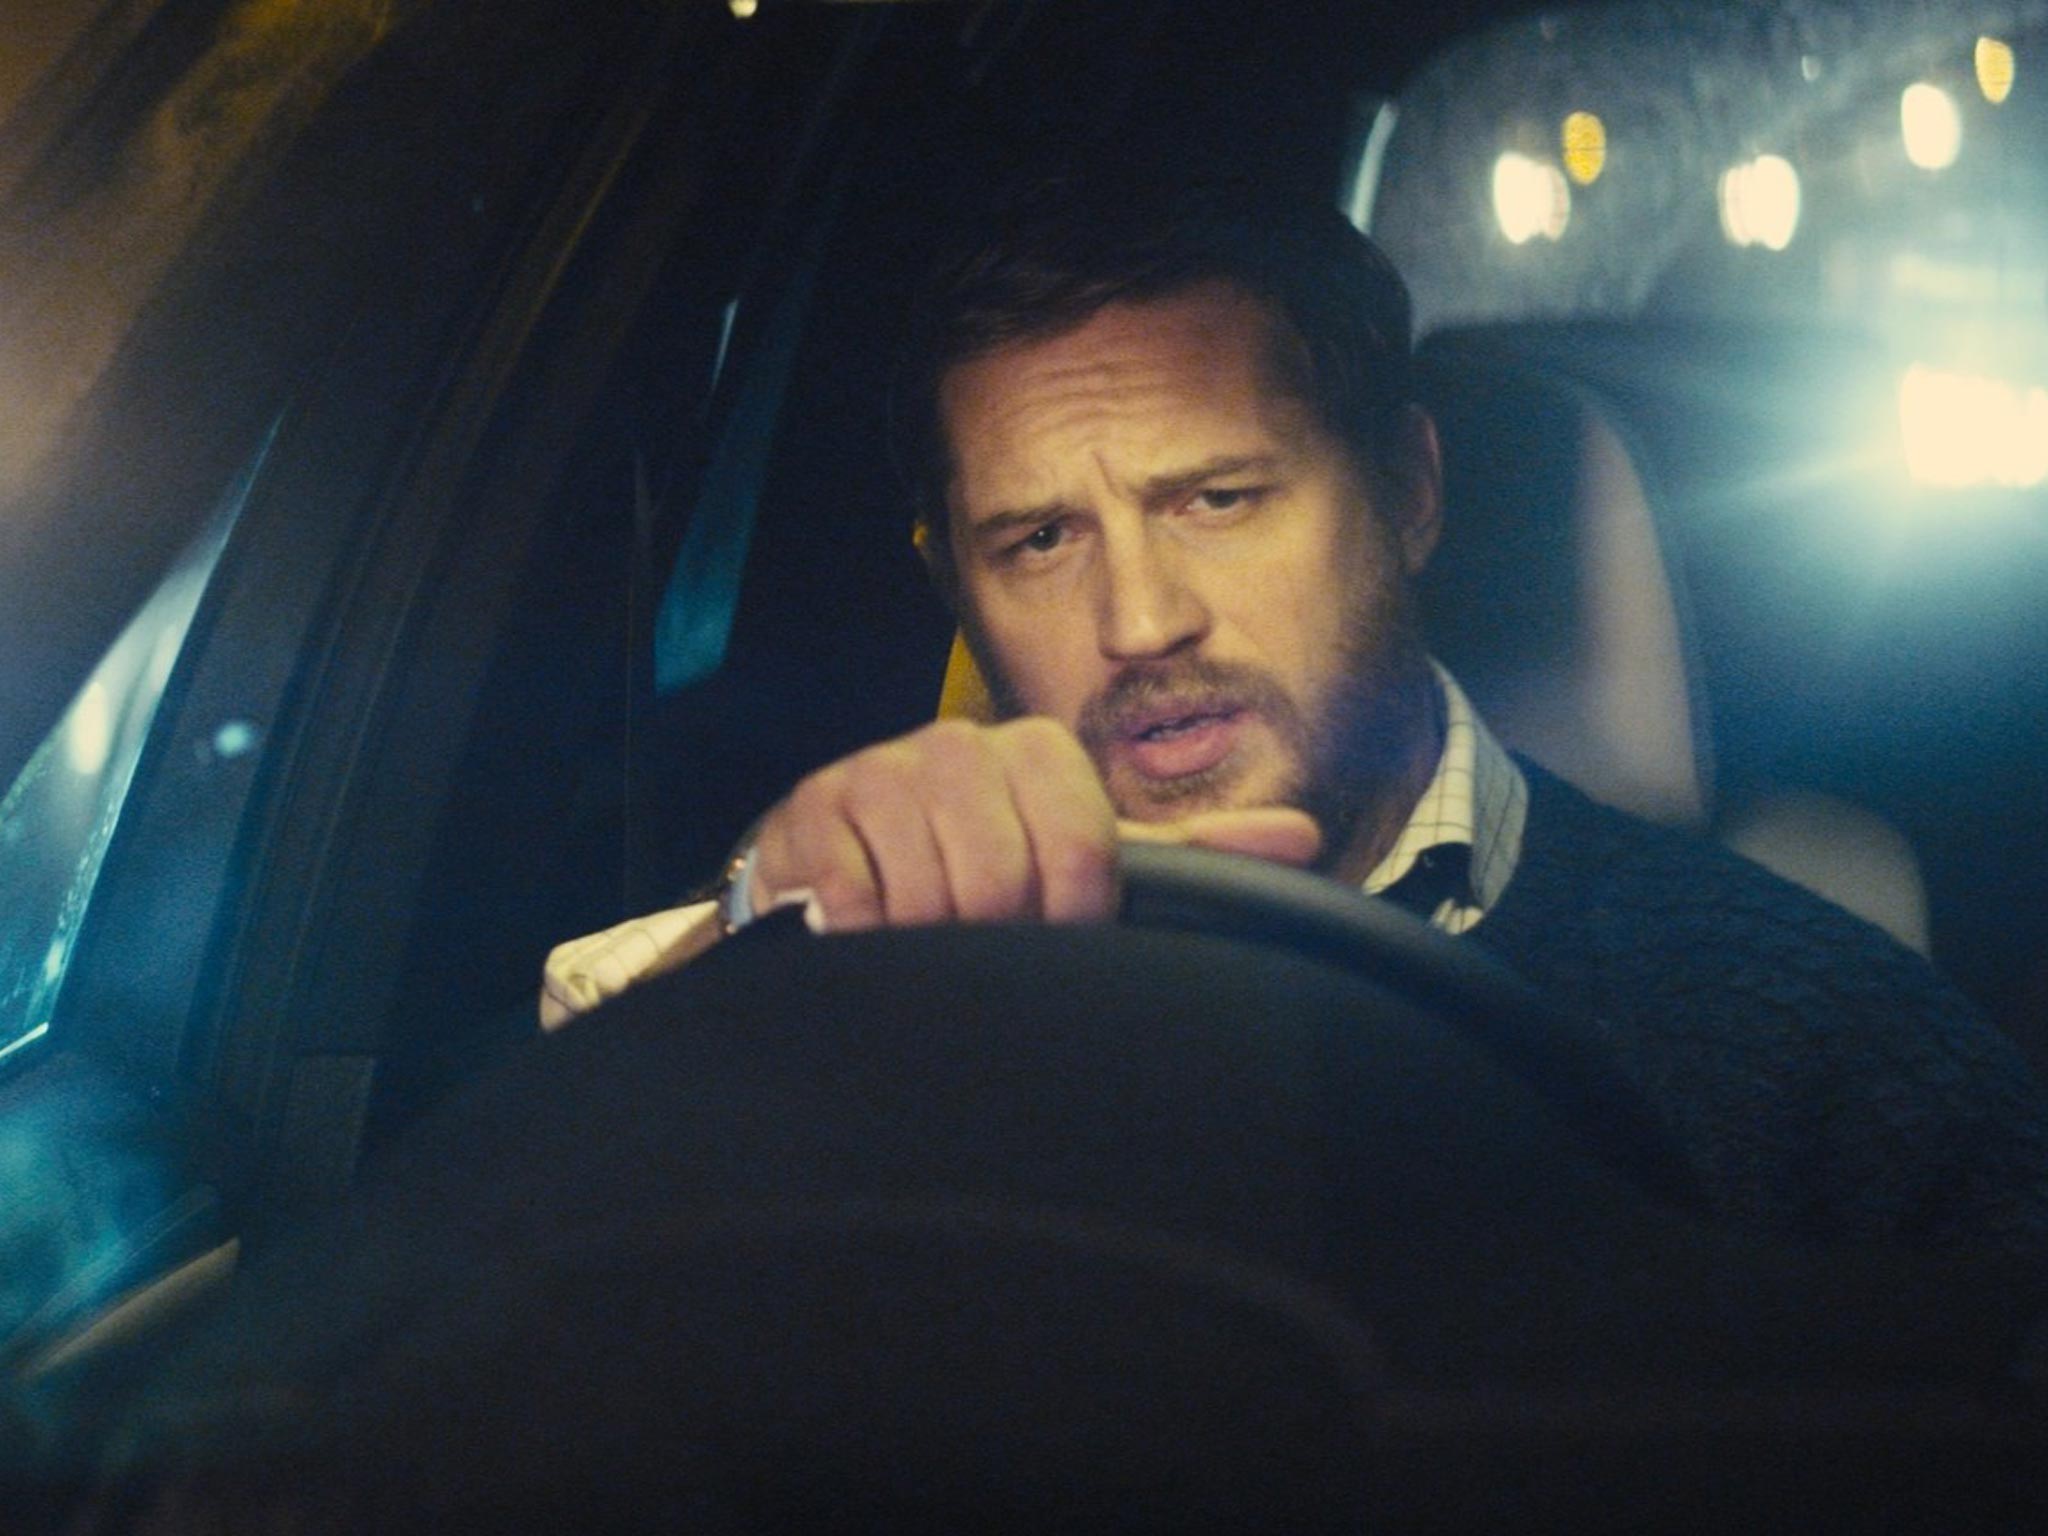 Road warrior: Tom Hardy fights to keep his cool in ‘Locke’